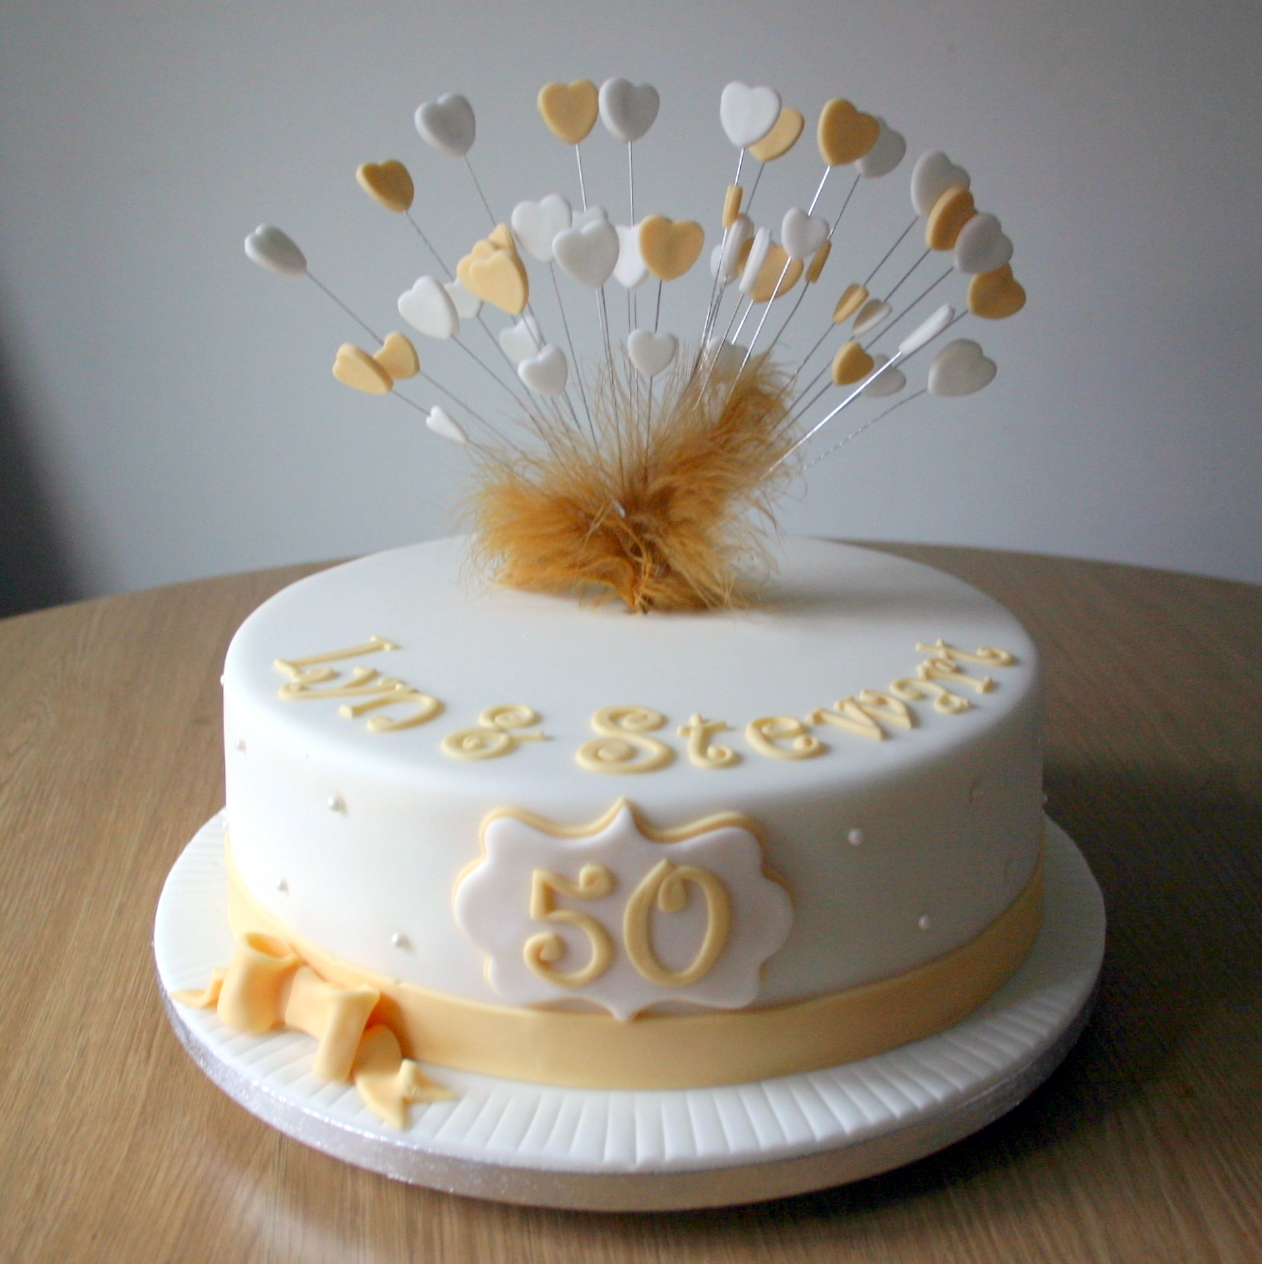  50th  Anniversary  Cakes  That Are So Adorable for Your 